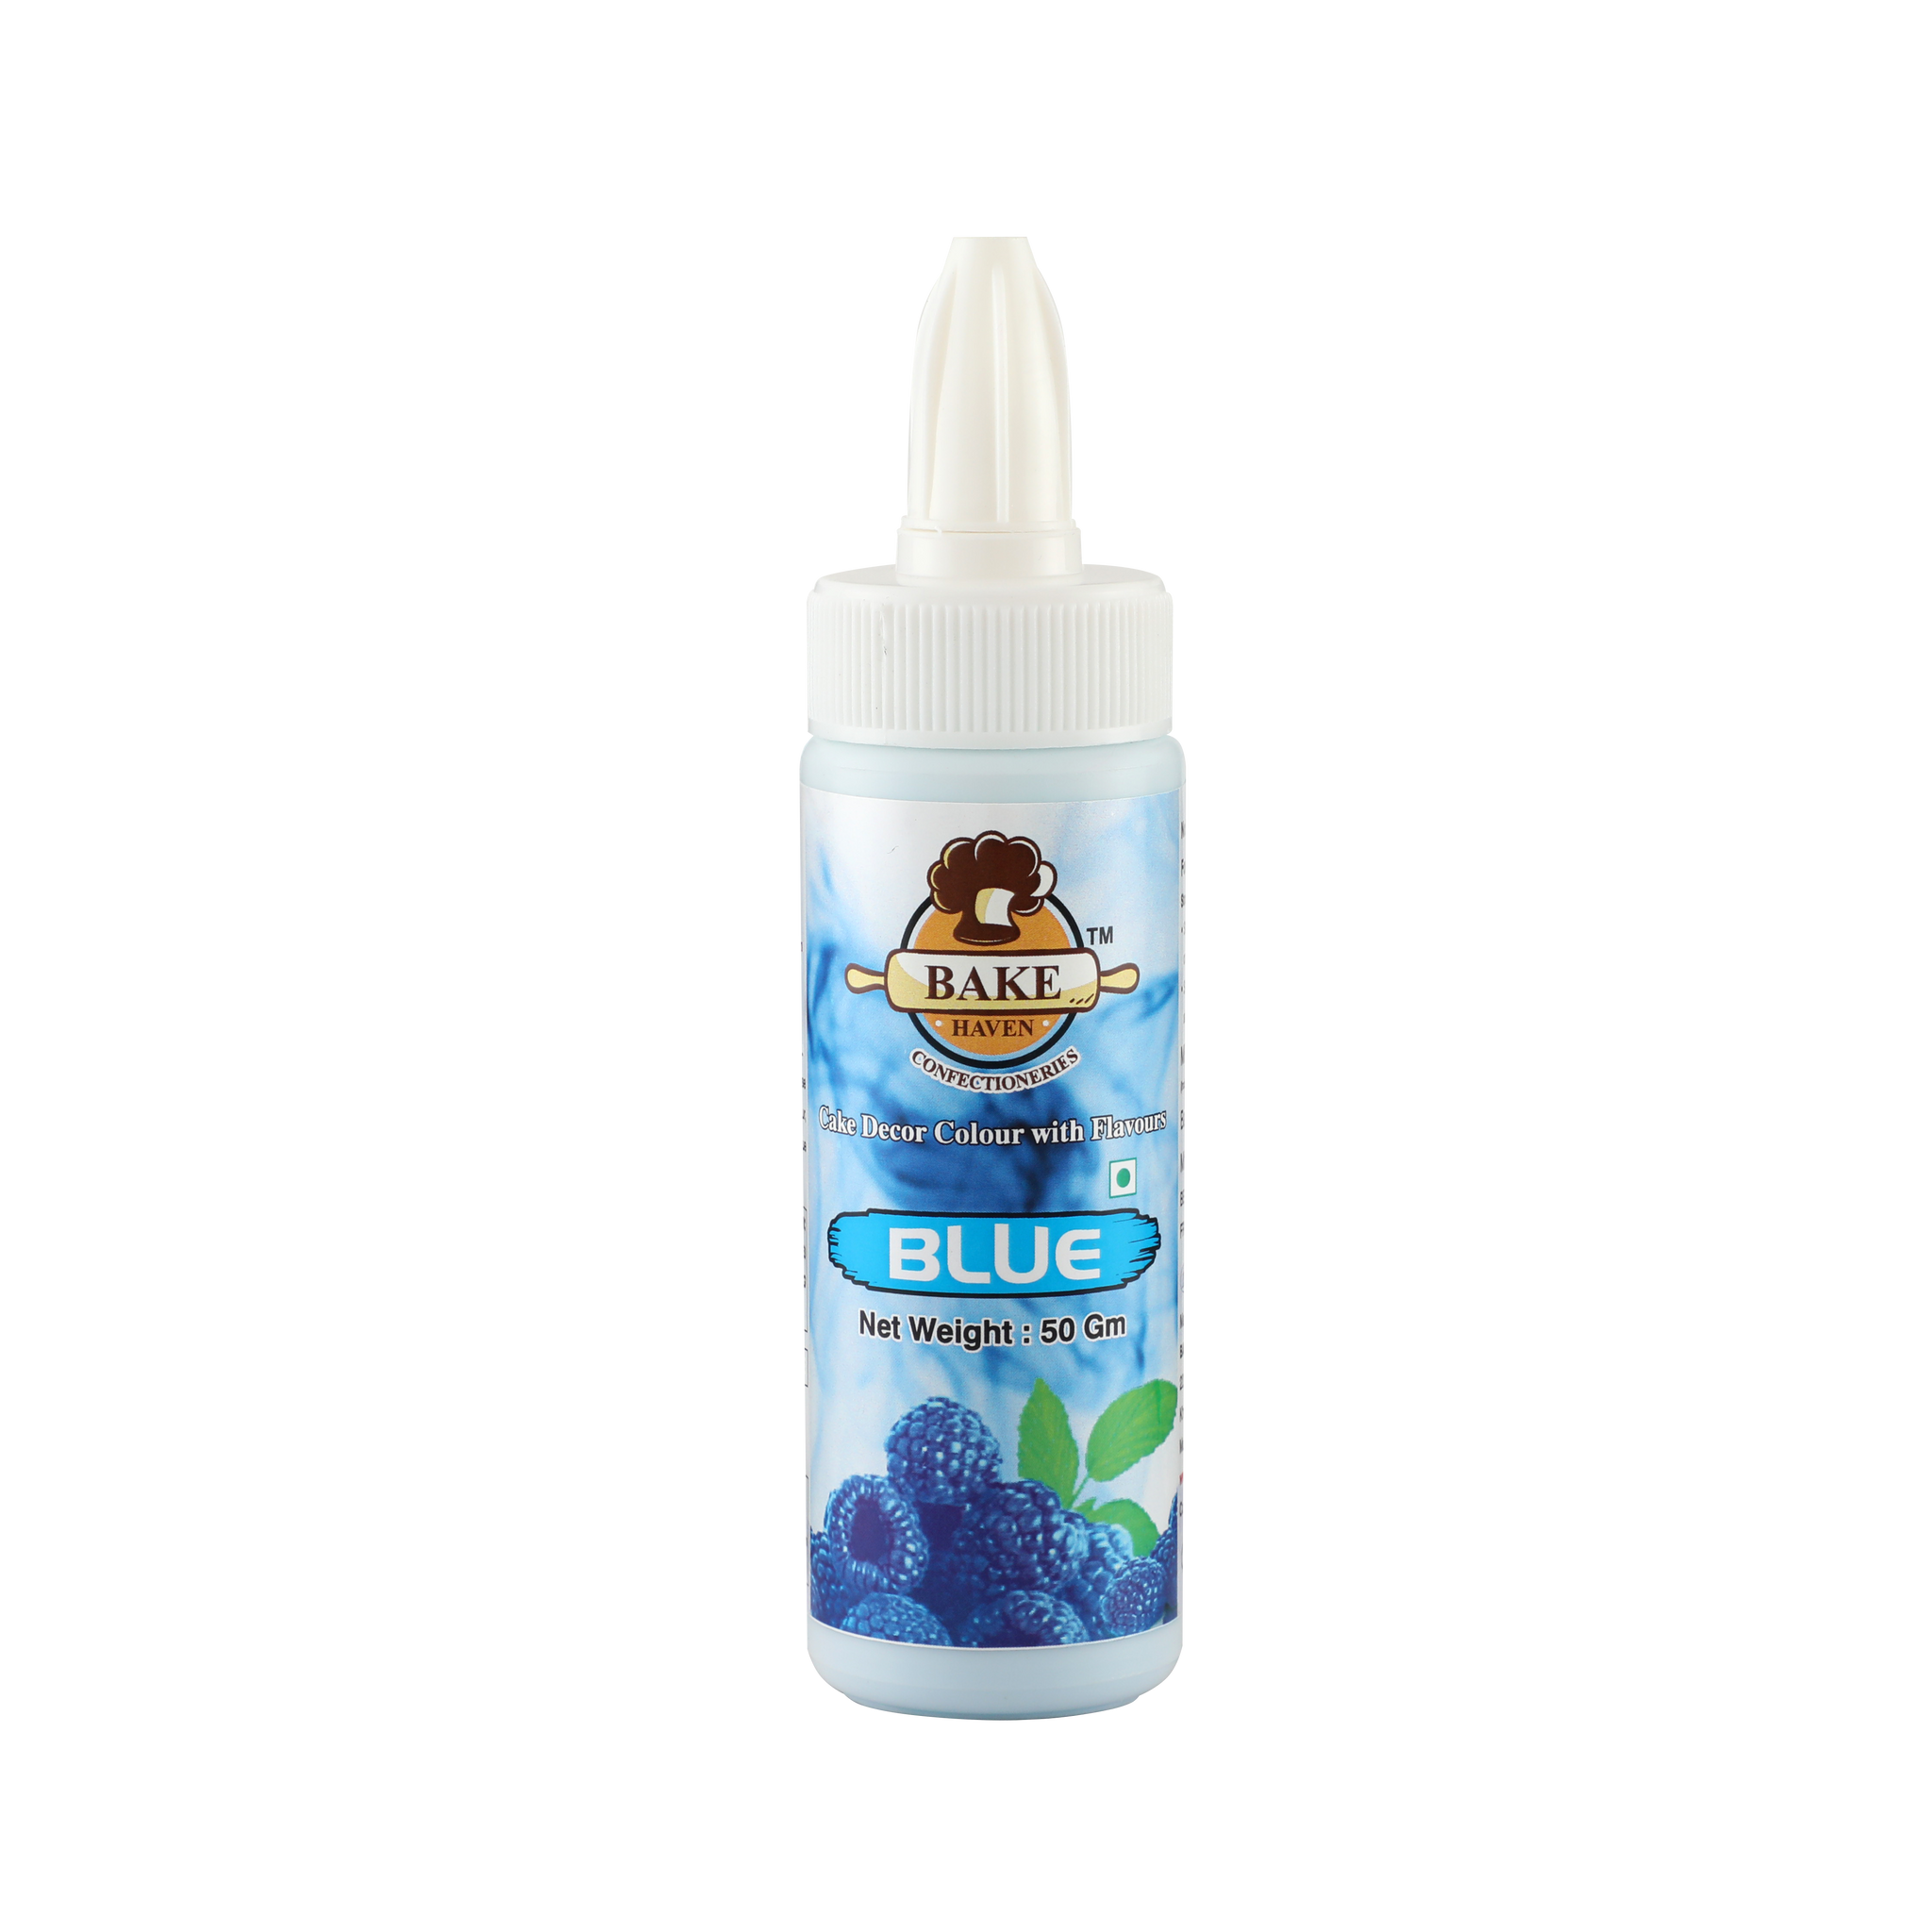 Bake Haven Cake Decor Spray Powder Colour with Flavours - Blue - 50g